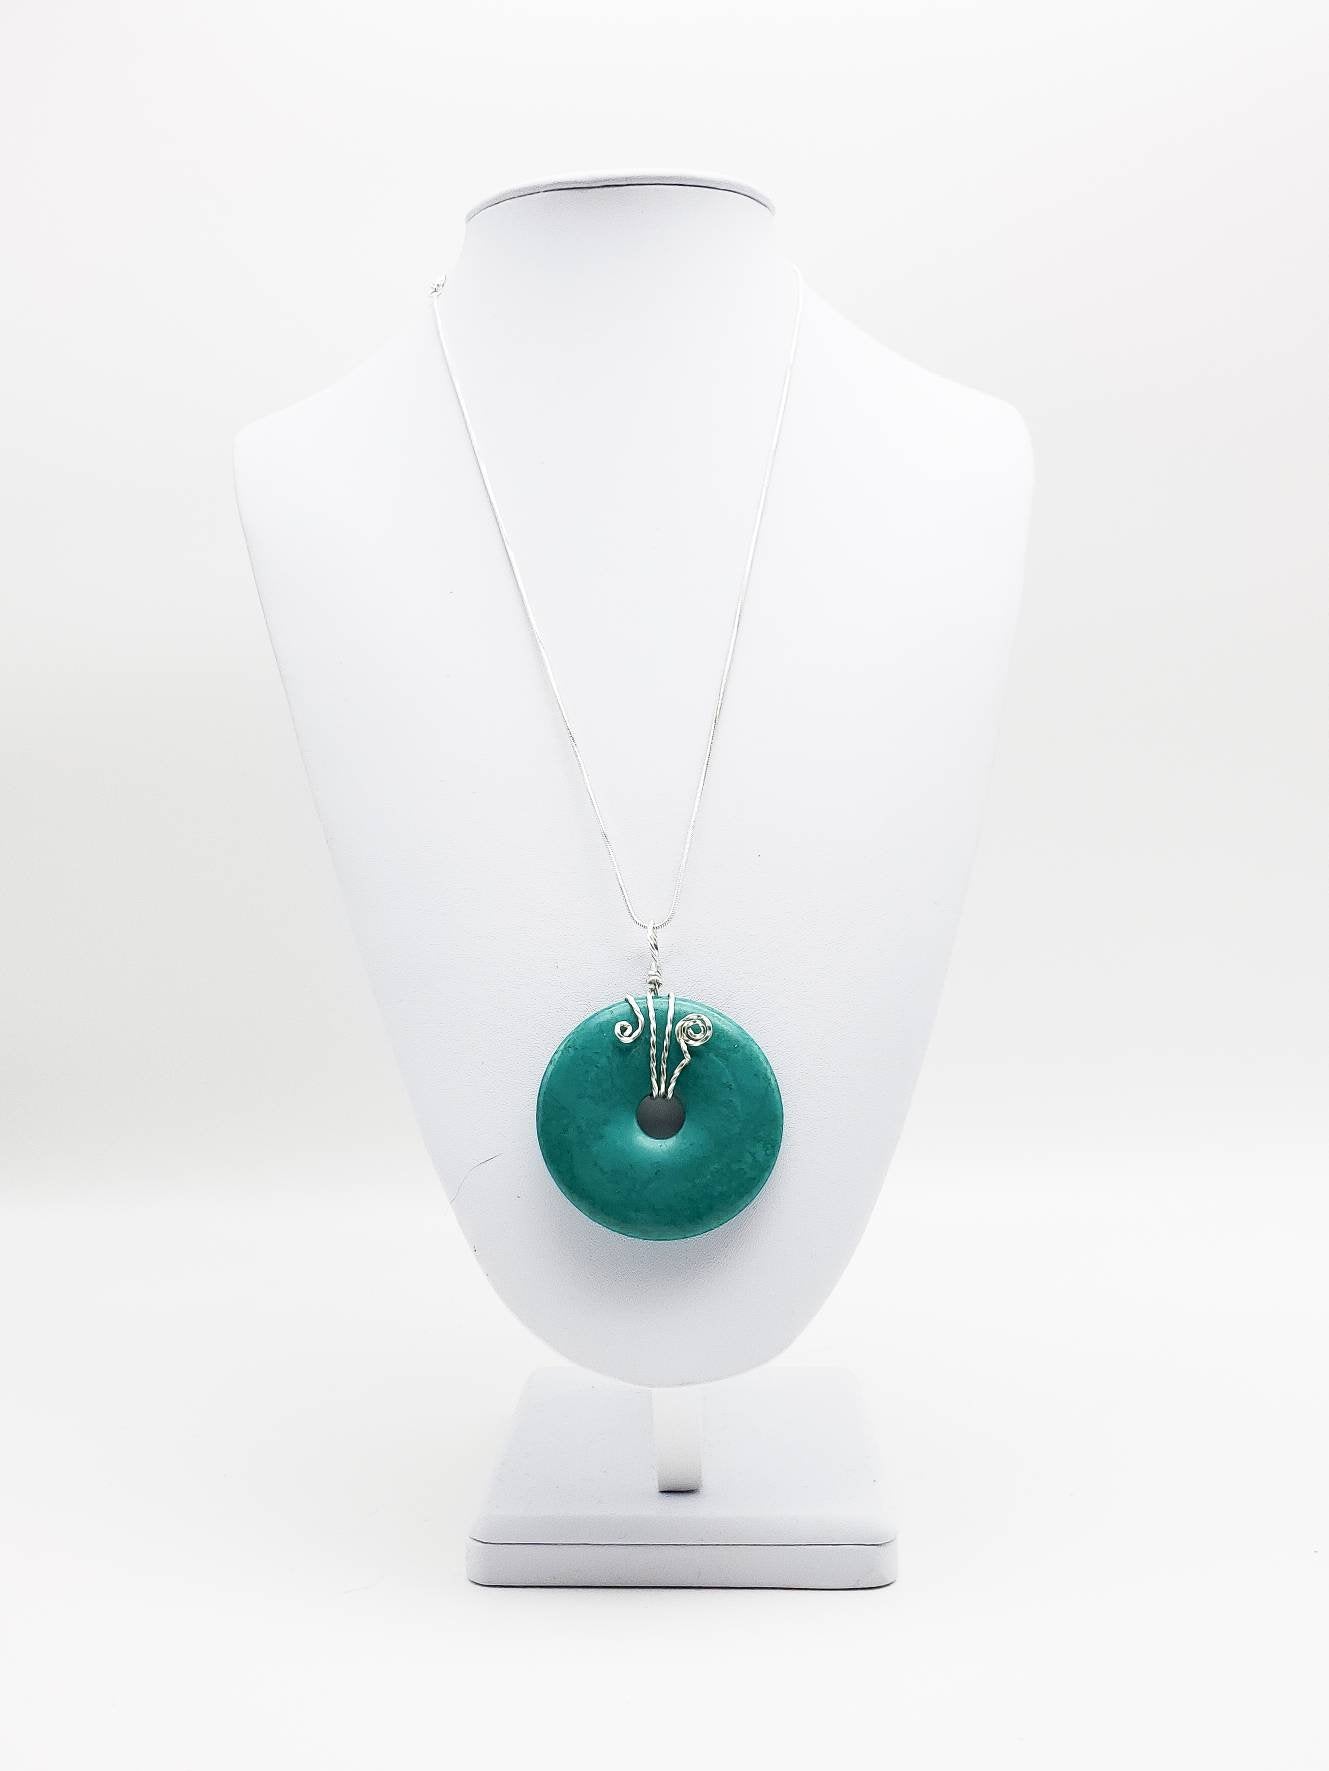 Turquoise Pendant Necklace - The Caffeinated Raven